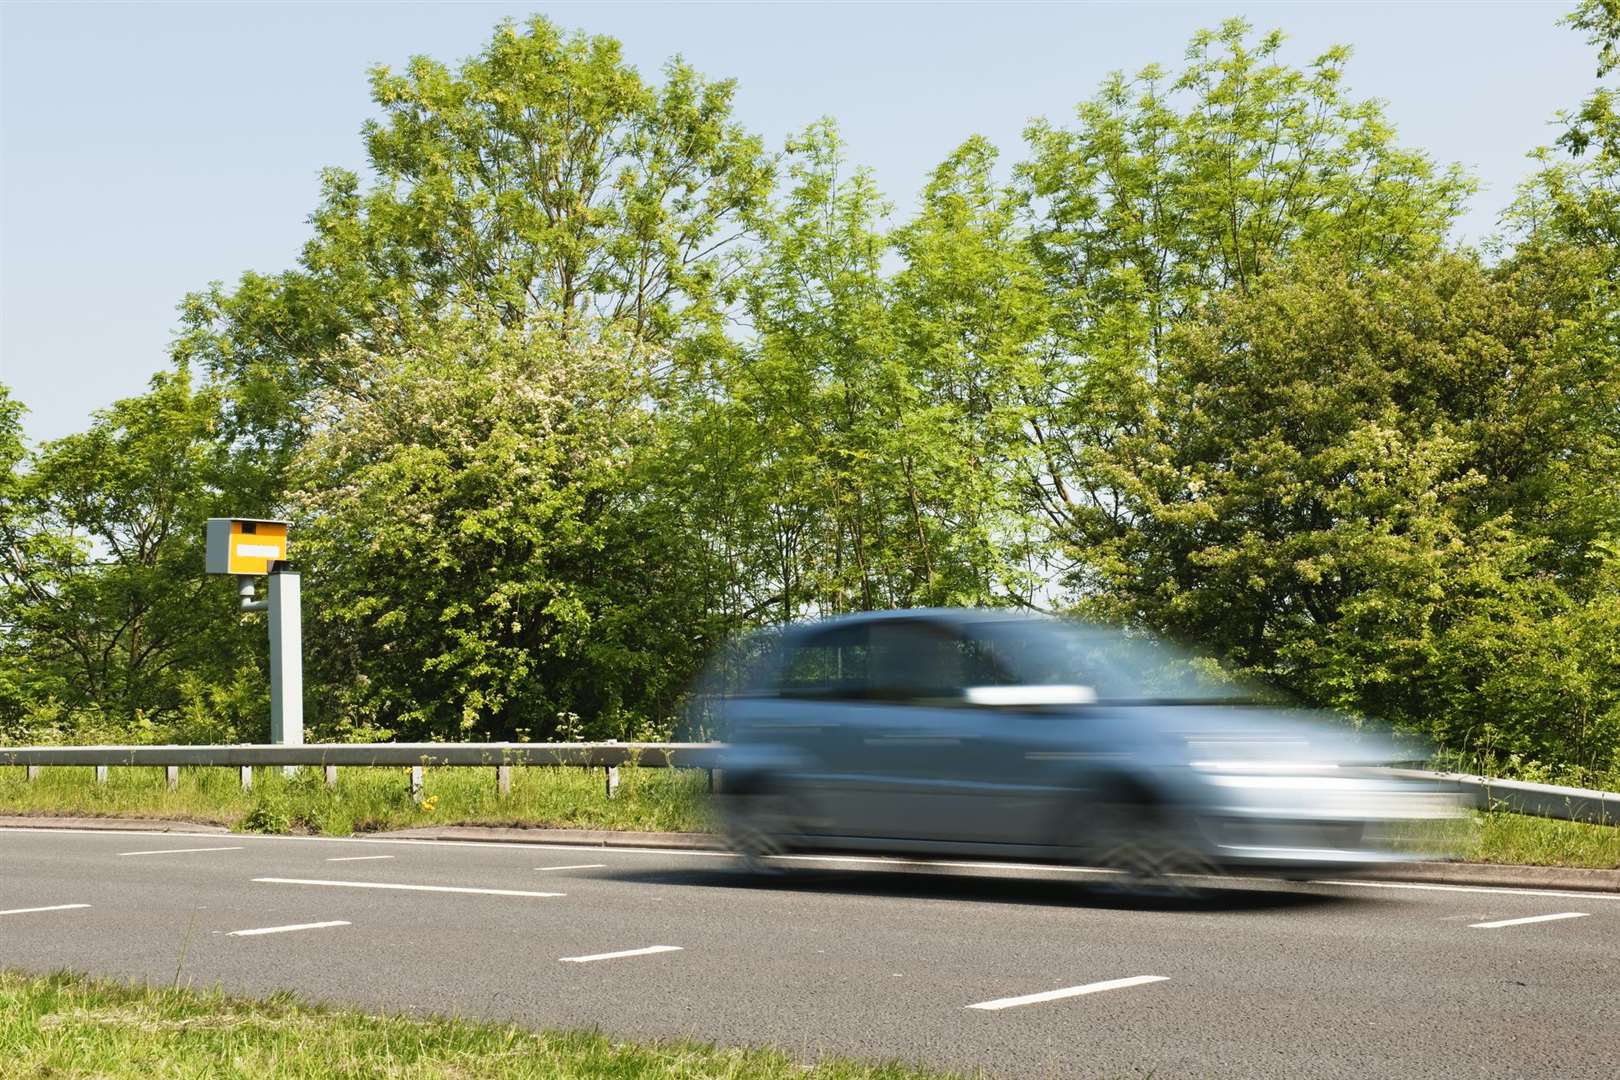 Police arrested a man after he sped past them at 130mph Stock picture